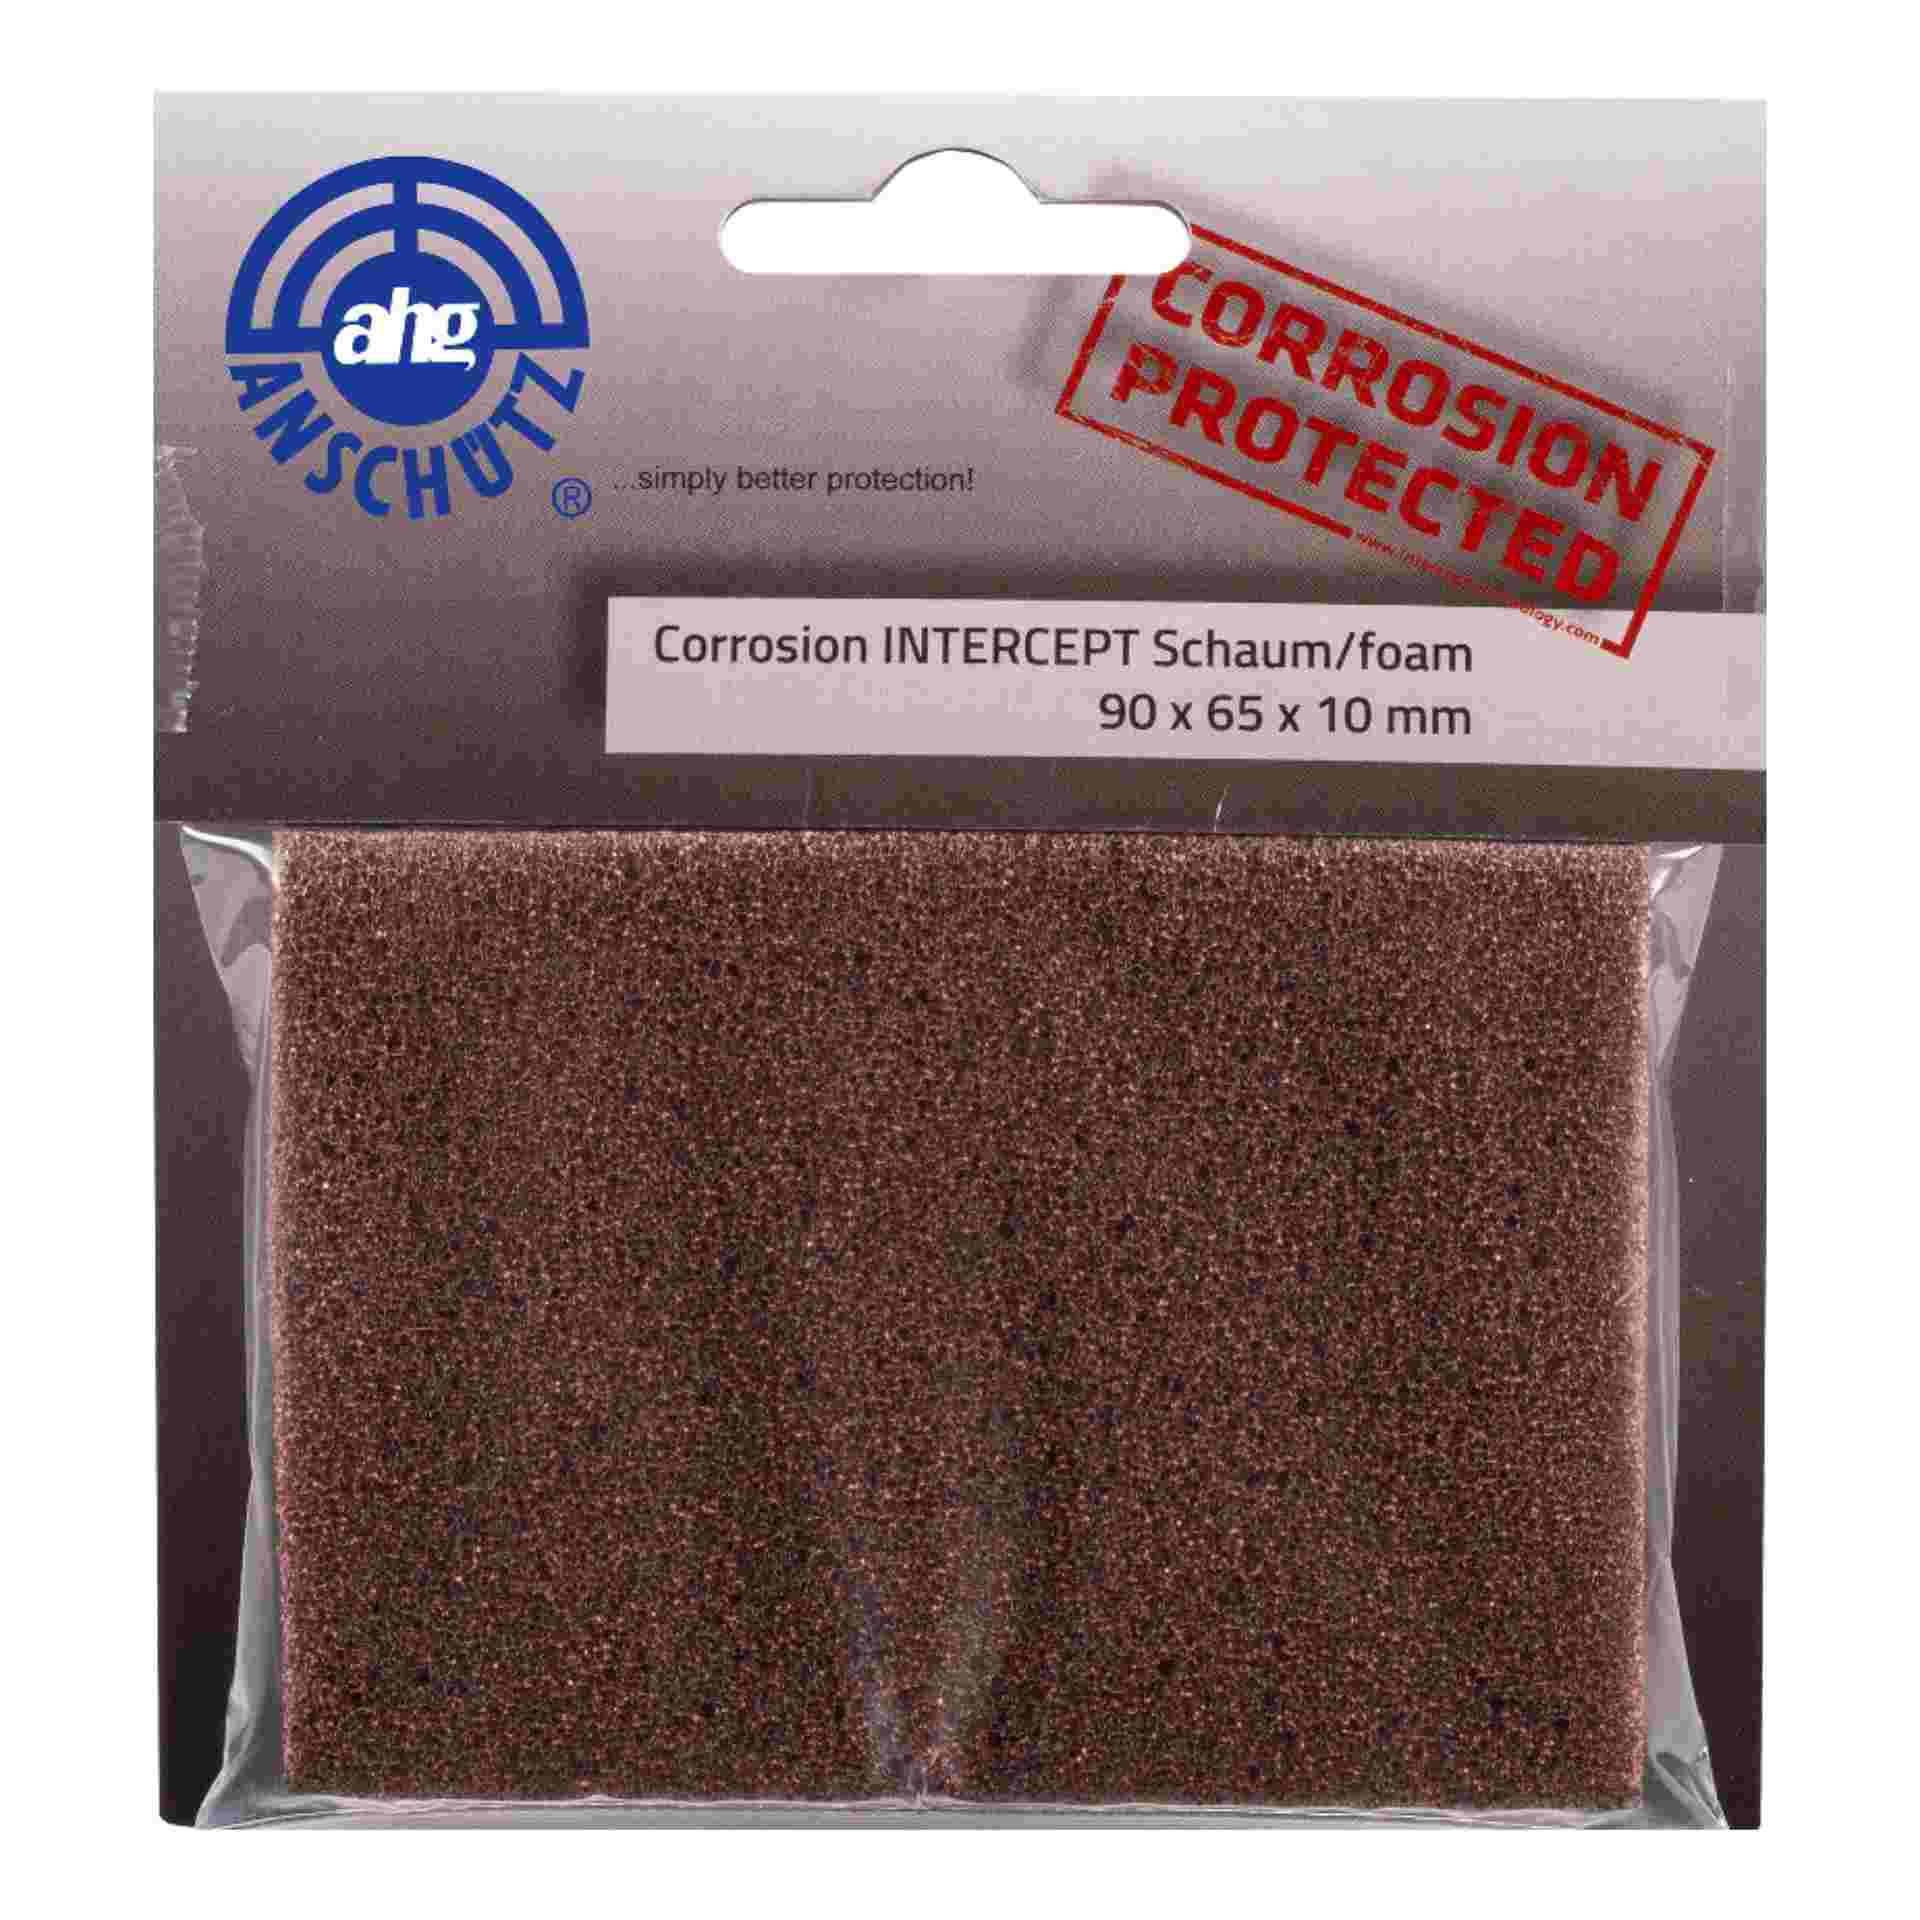 Corrosion Intercept for bags and cases